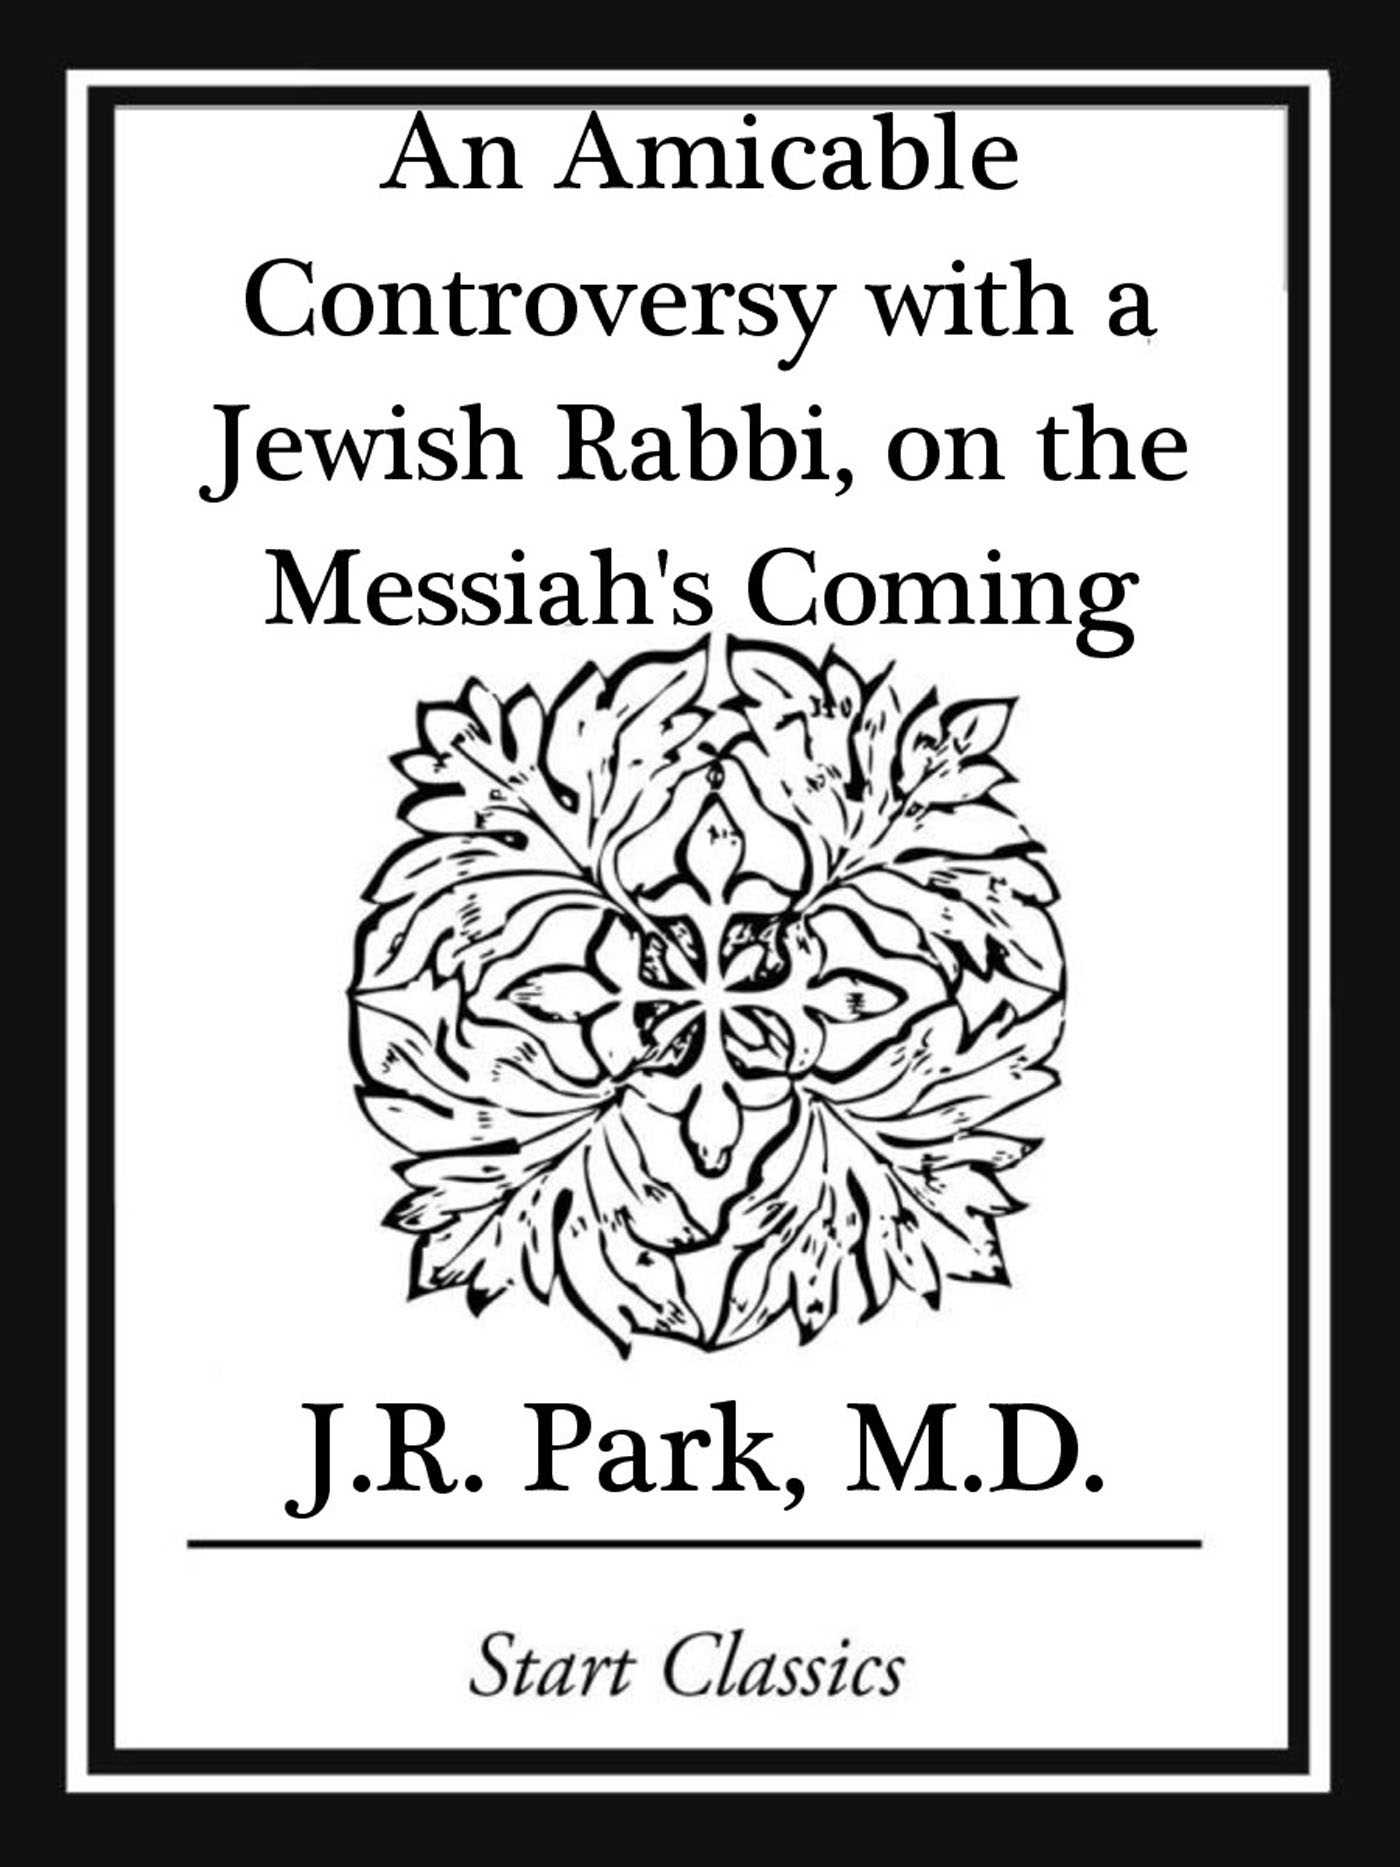 An Amicable Controversy with a Jewish Rabbi, on the Messiah's Coming ...